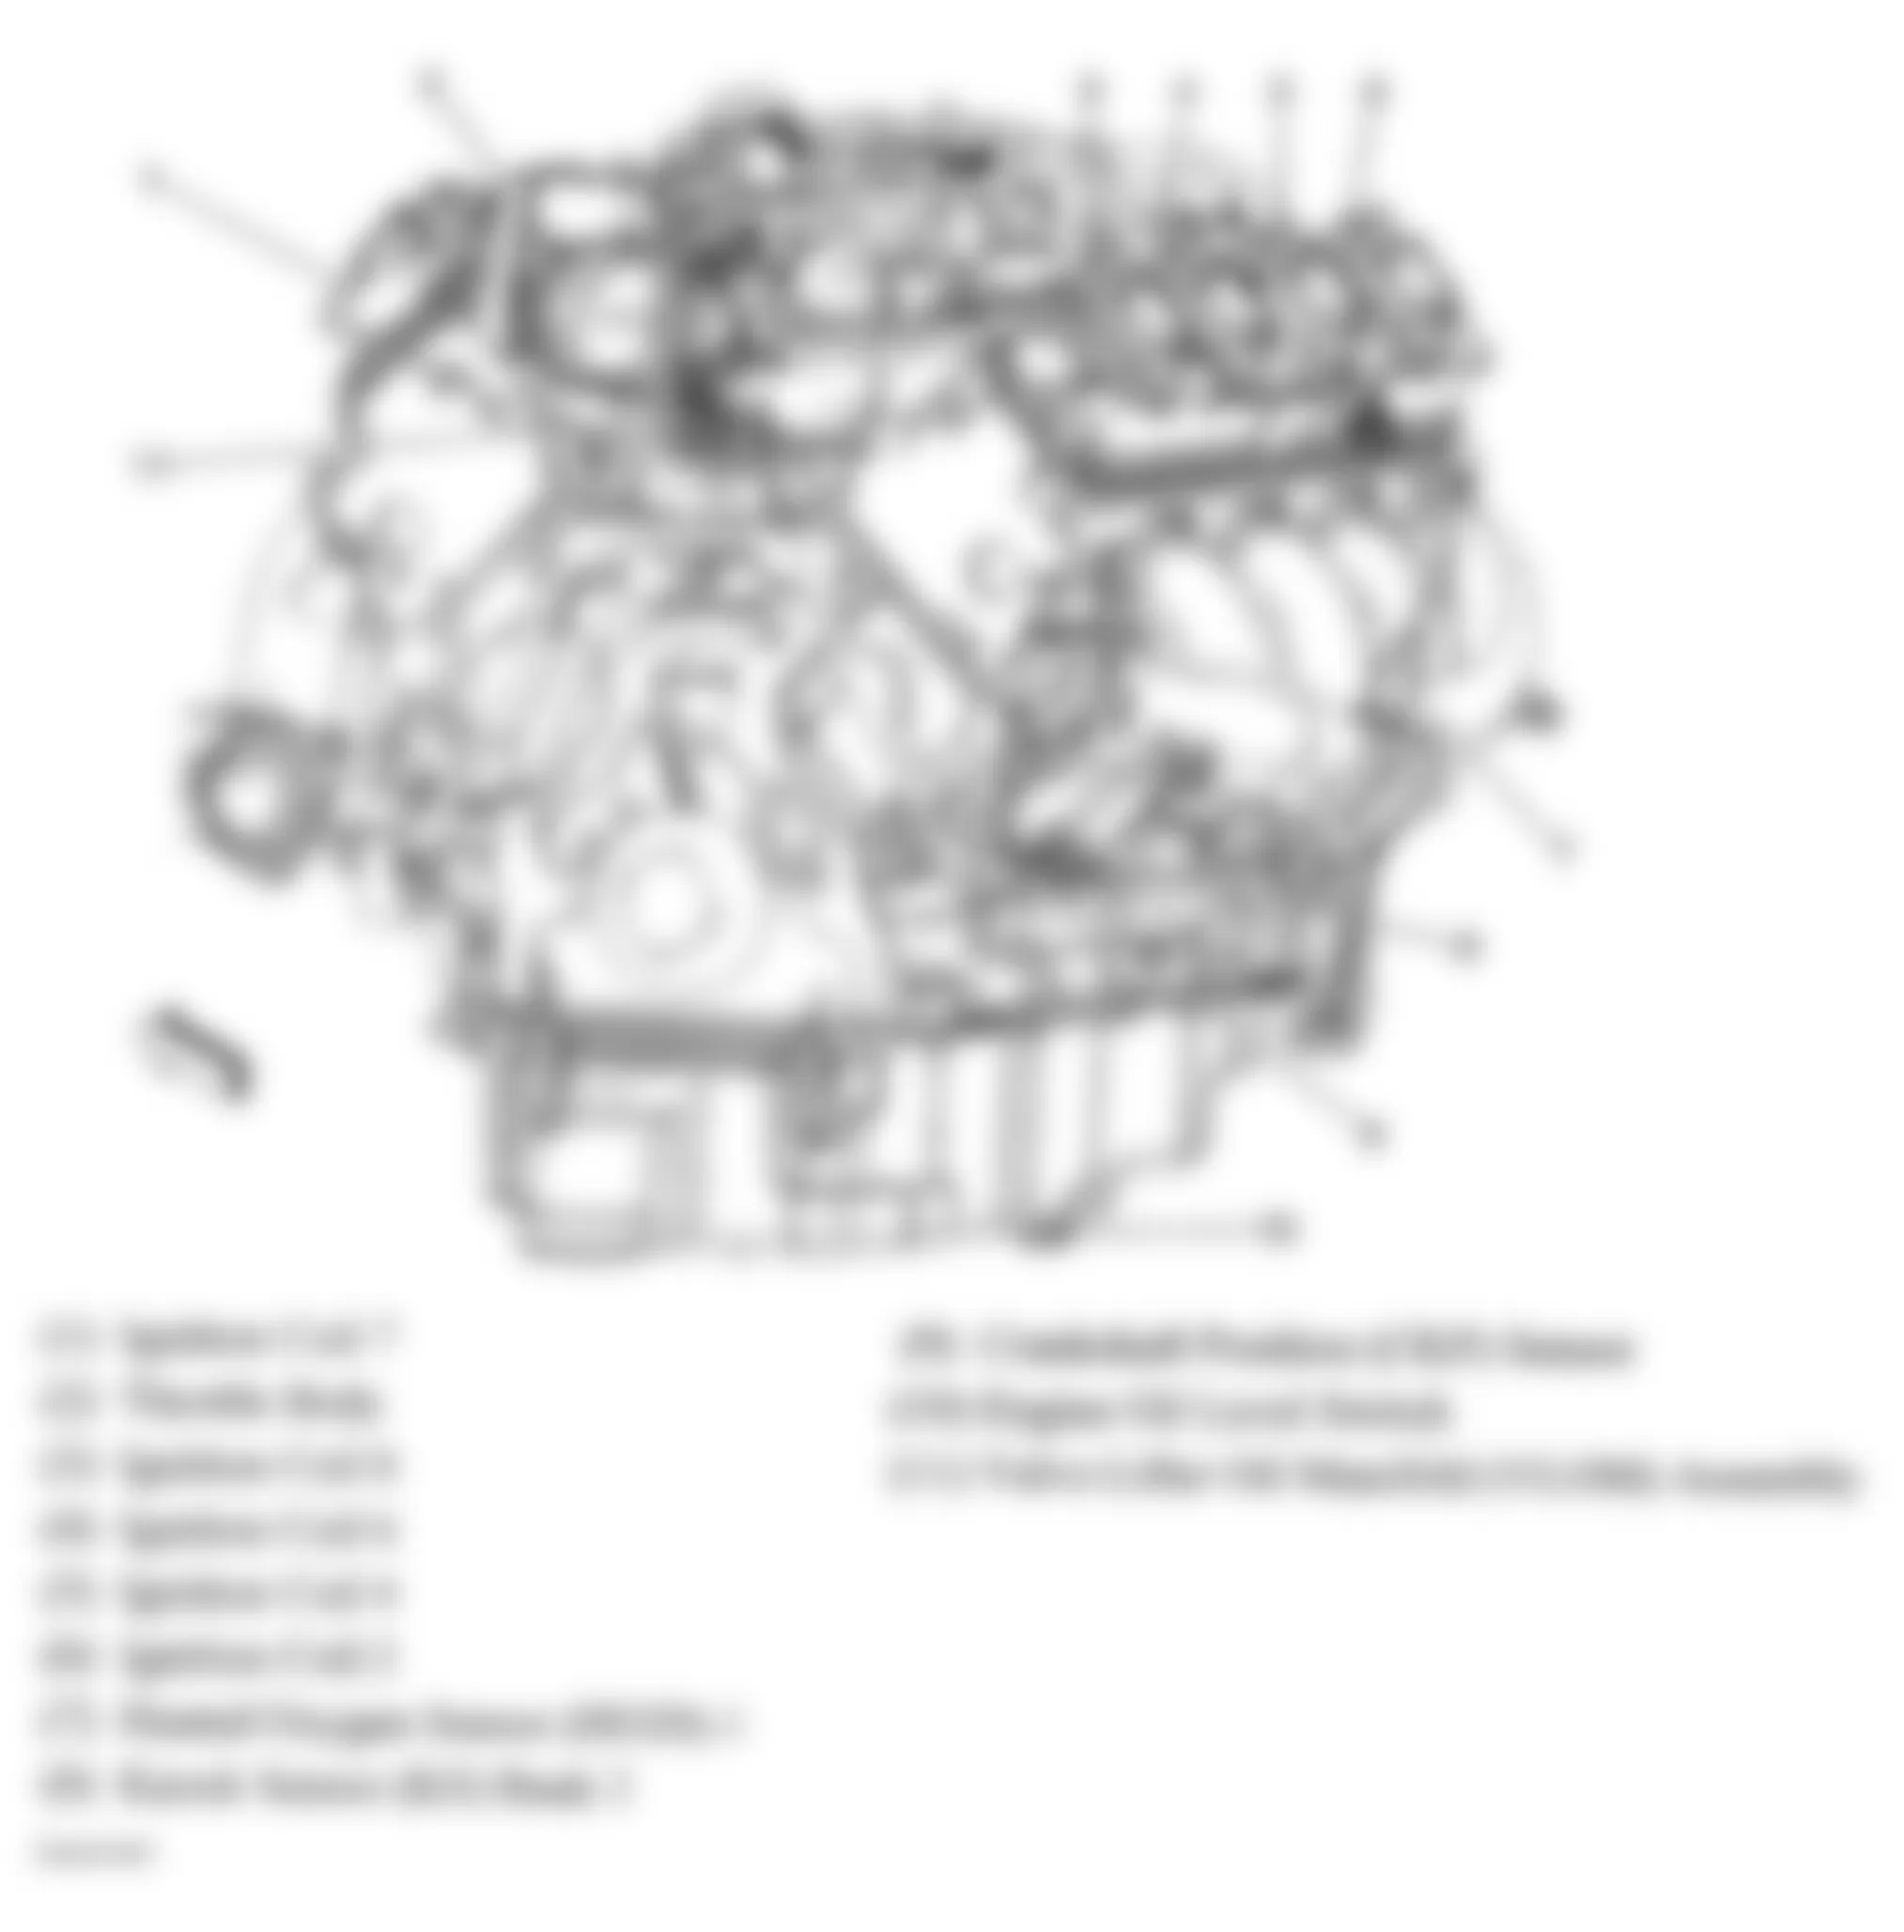 Chevrolet Impala LT 2009 - Component Locations -  Rear Of Engine (5.3L)